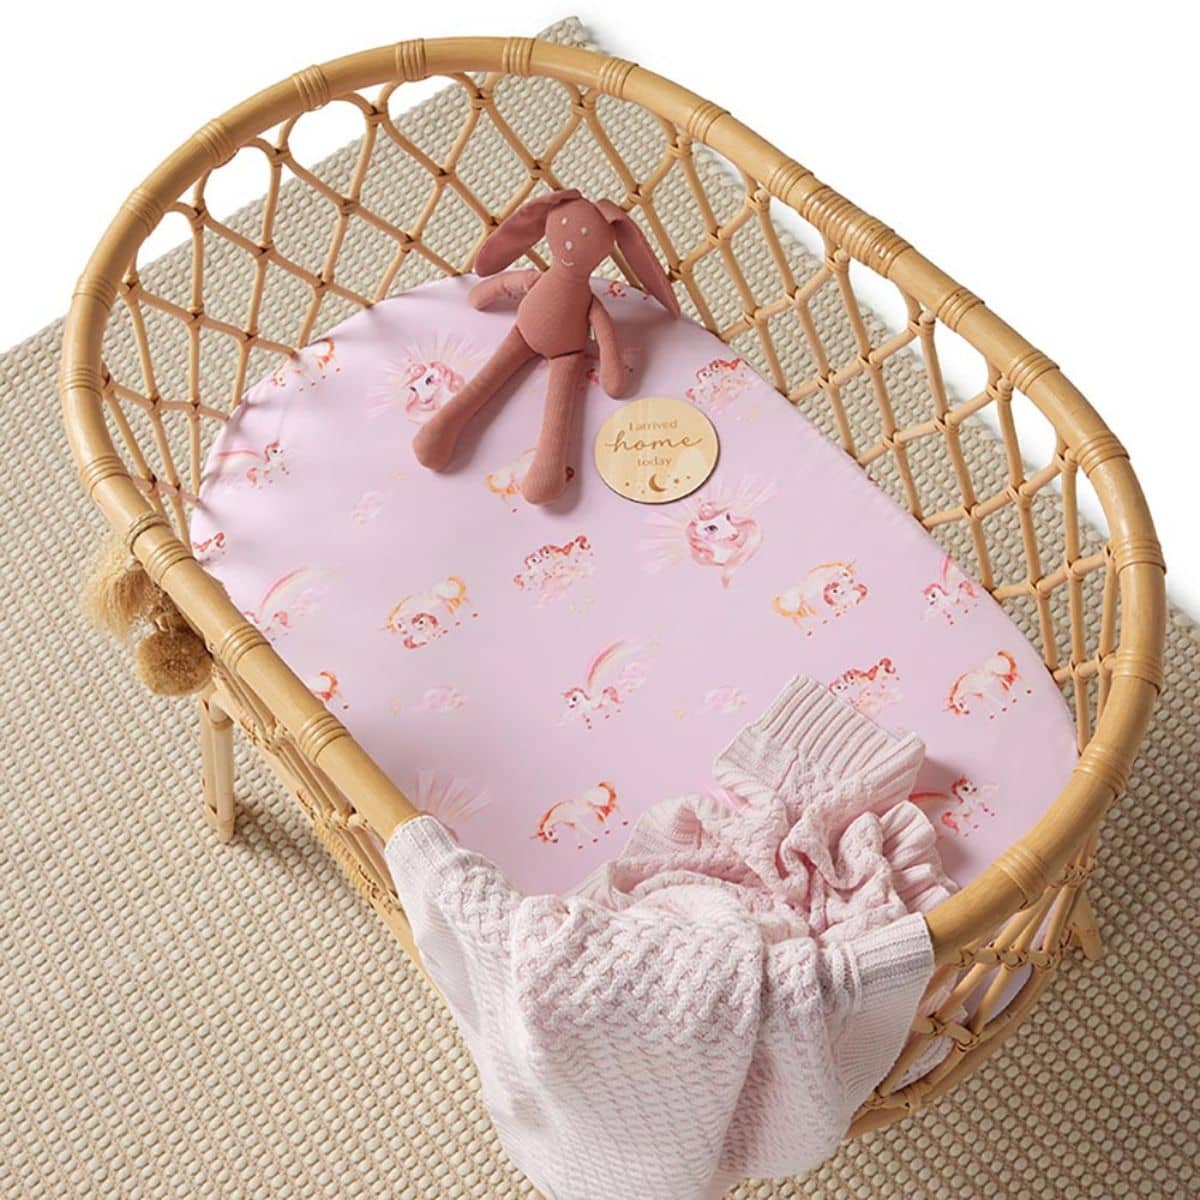 Snuggle Hunny Fitted Bassinet Sheet and Change Pad Cover - Unicorn Organic